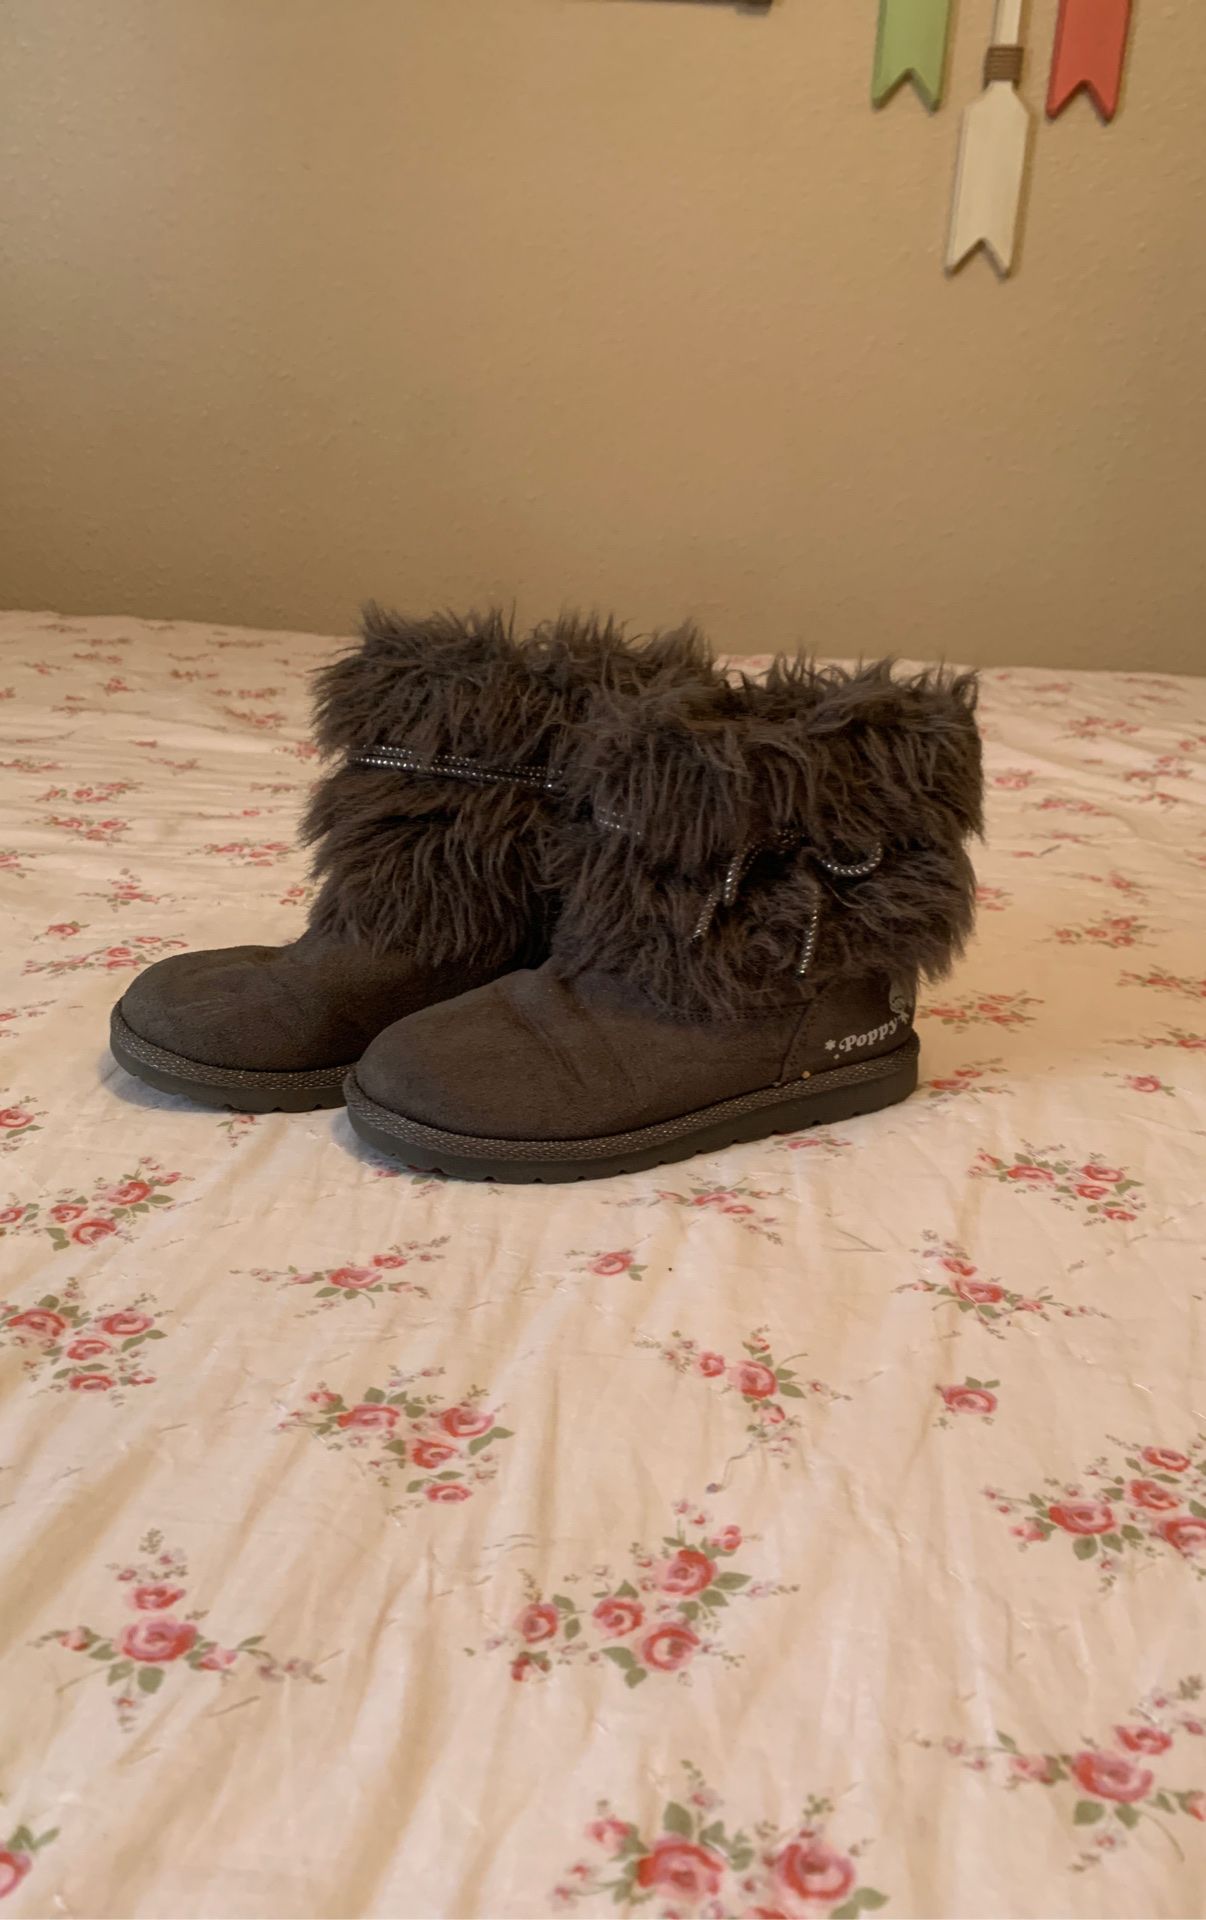 Girls boots size 13